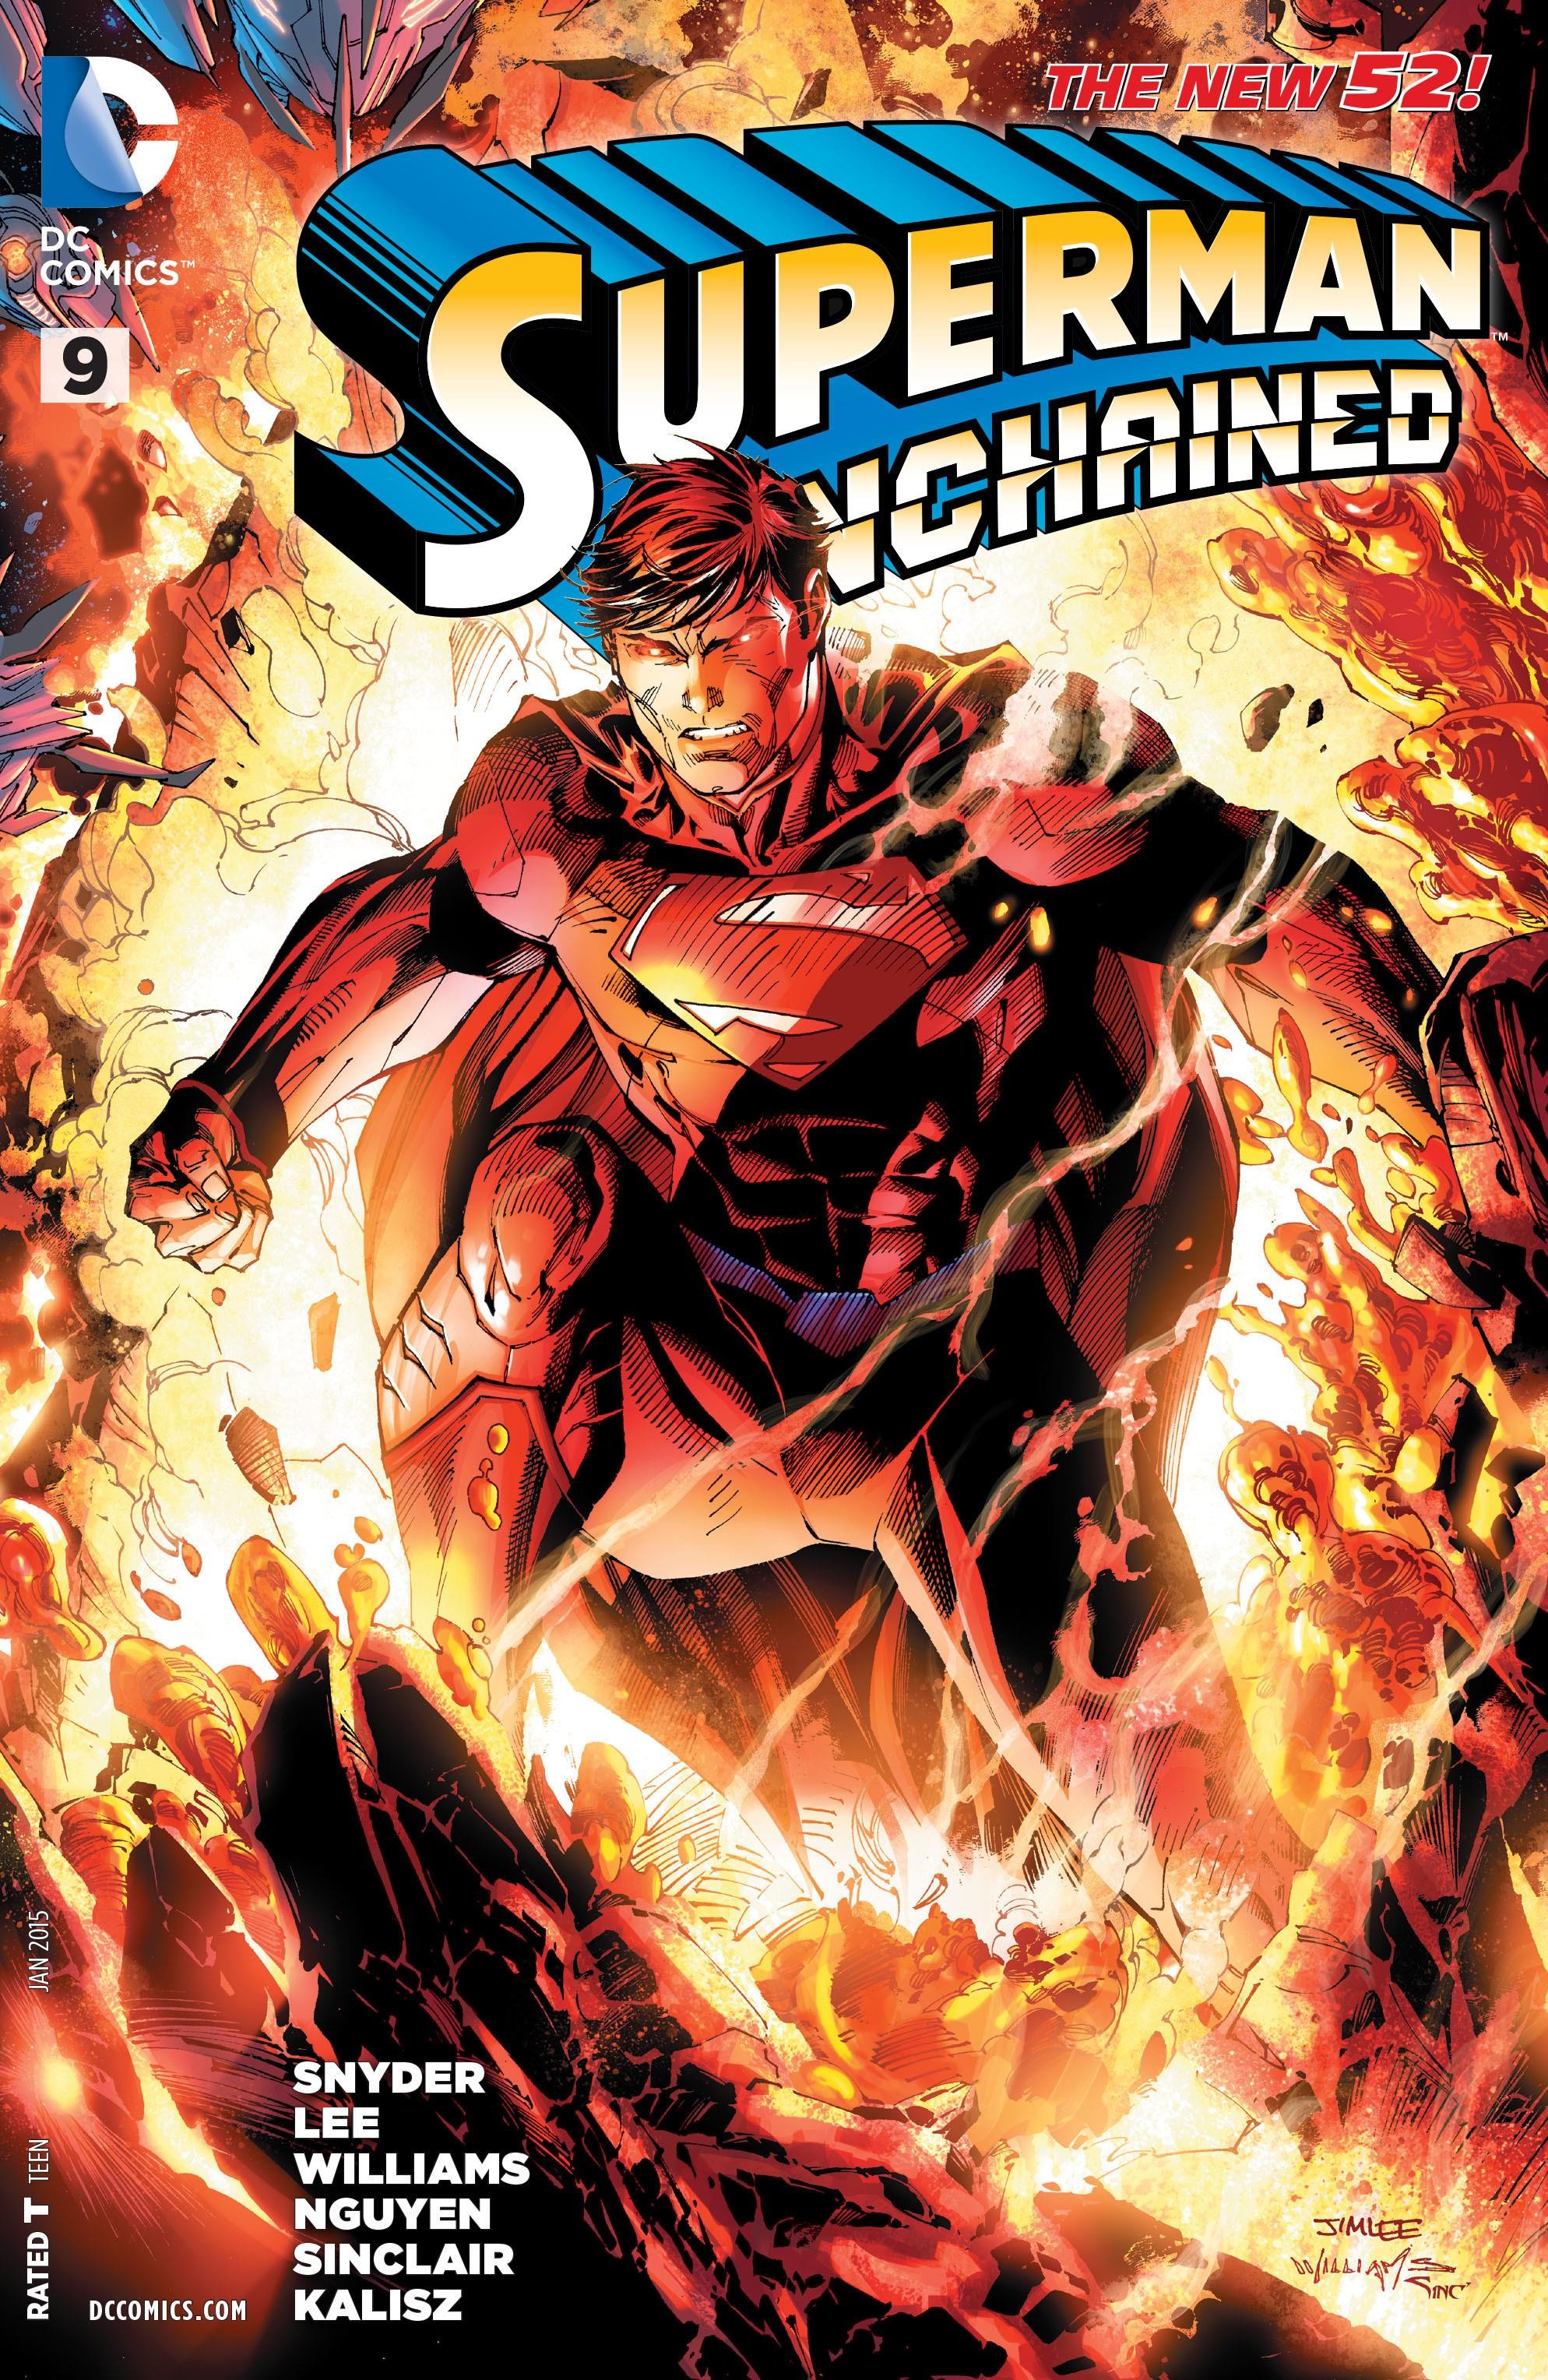 Superman Unchained Vol. 1 #9